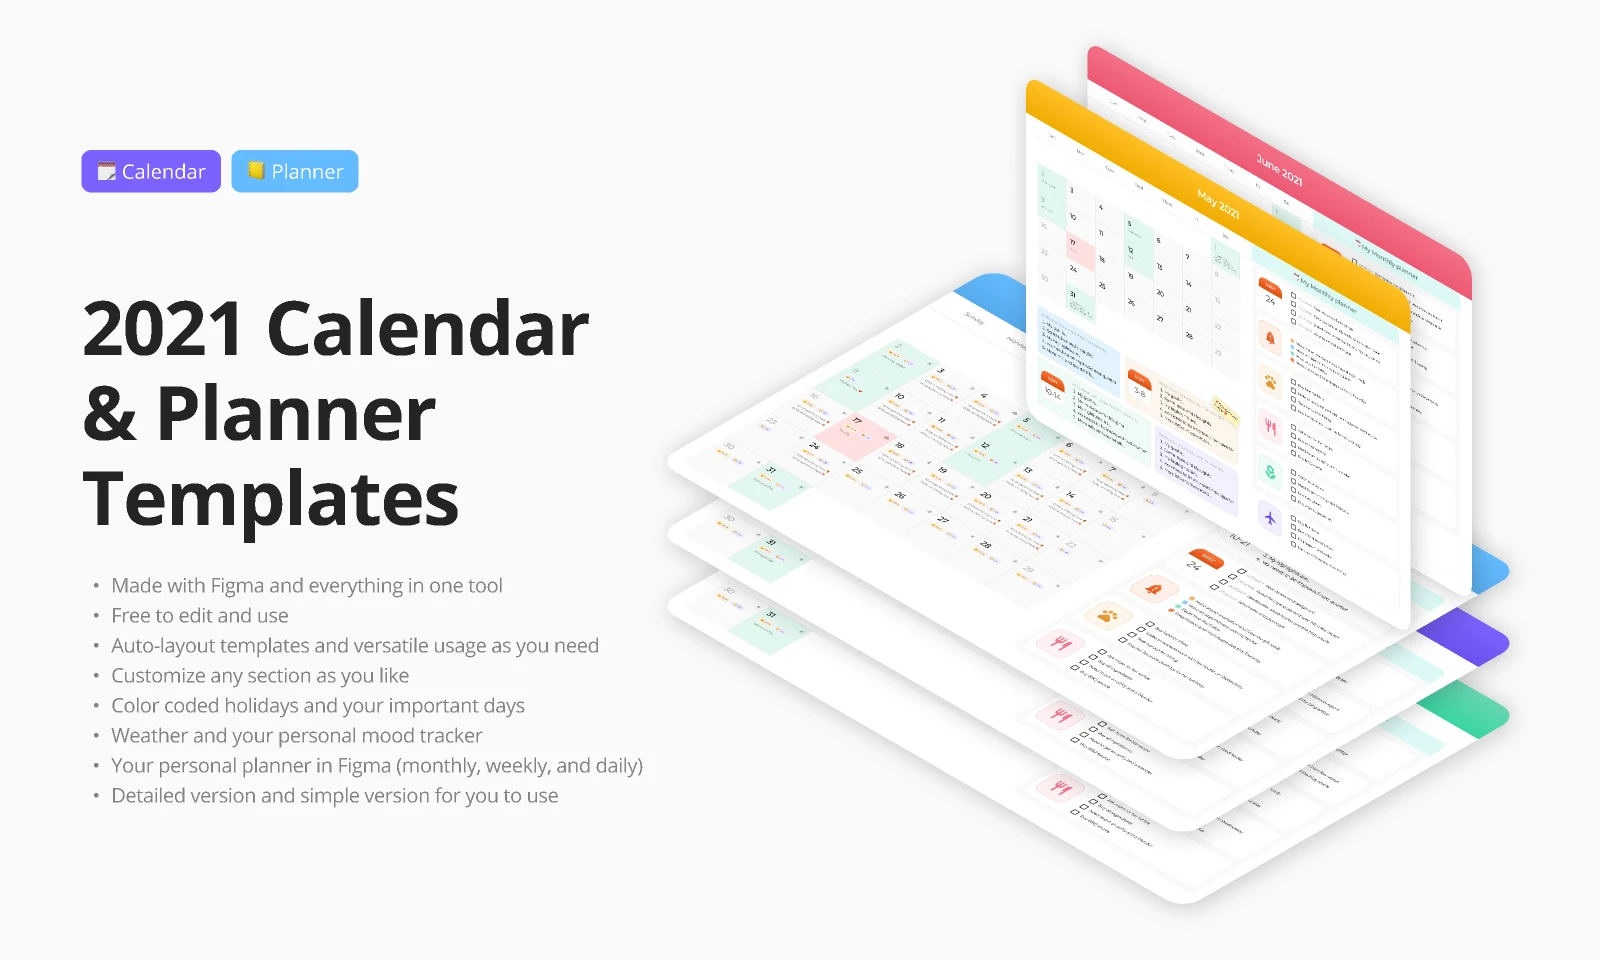 2021 Calendar and Planner Template for Figma and Adobe XD